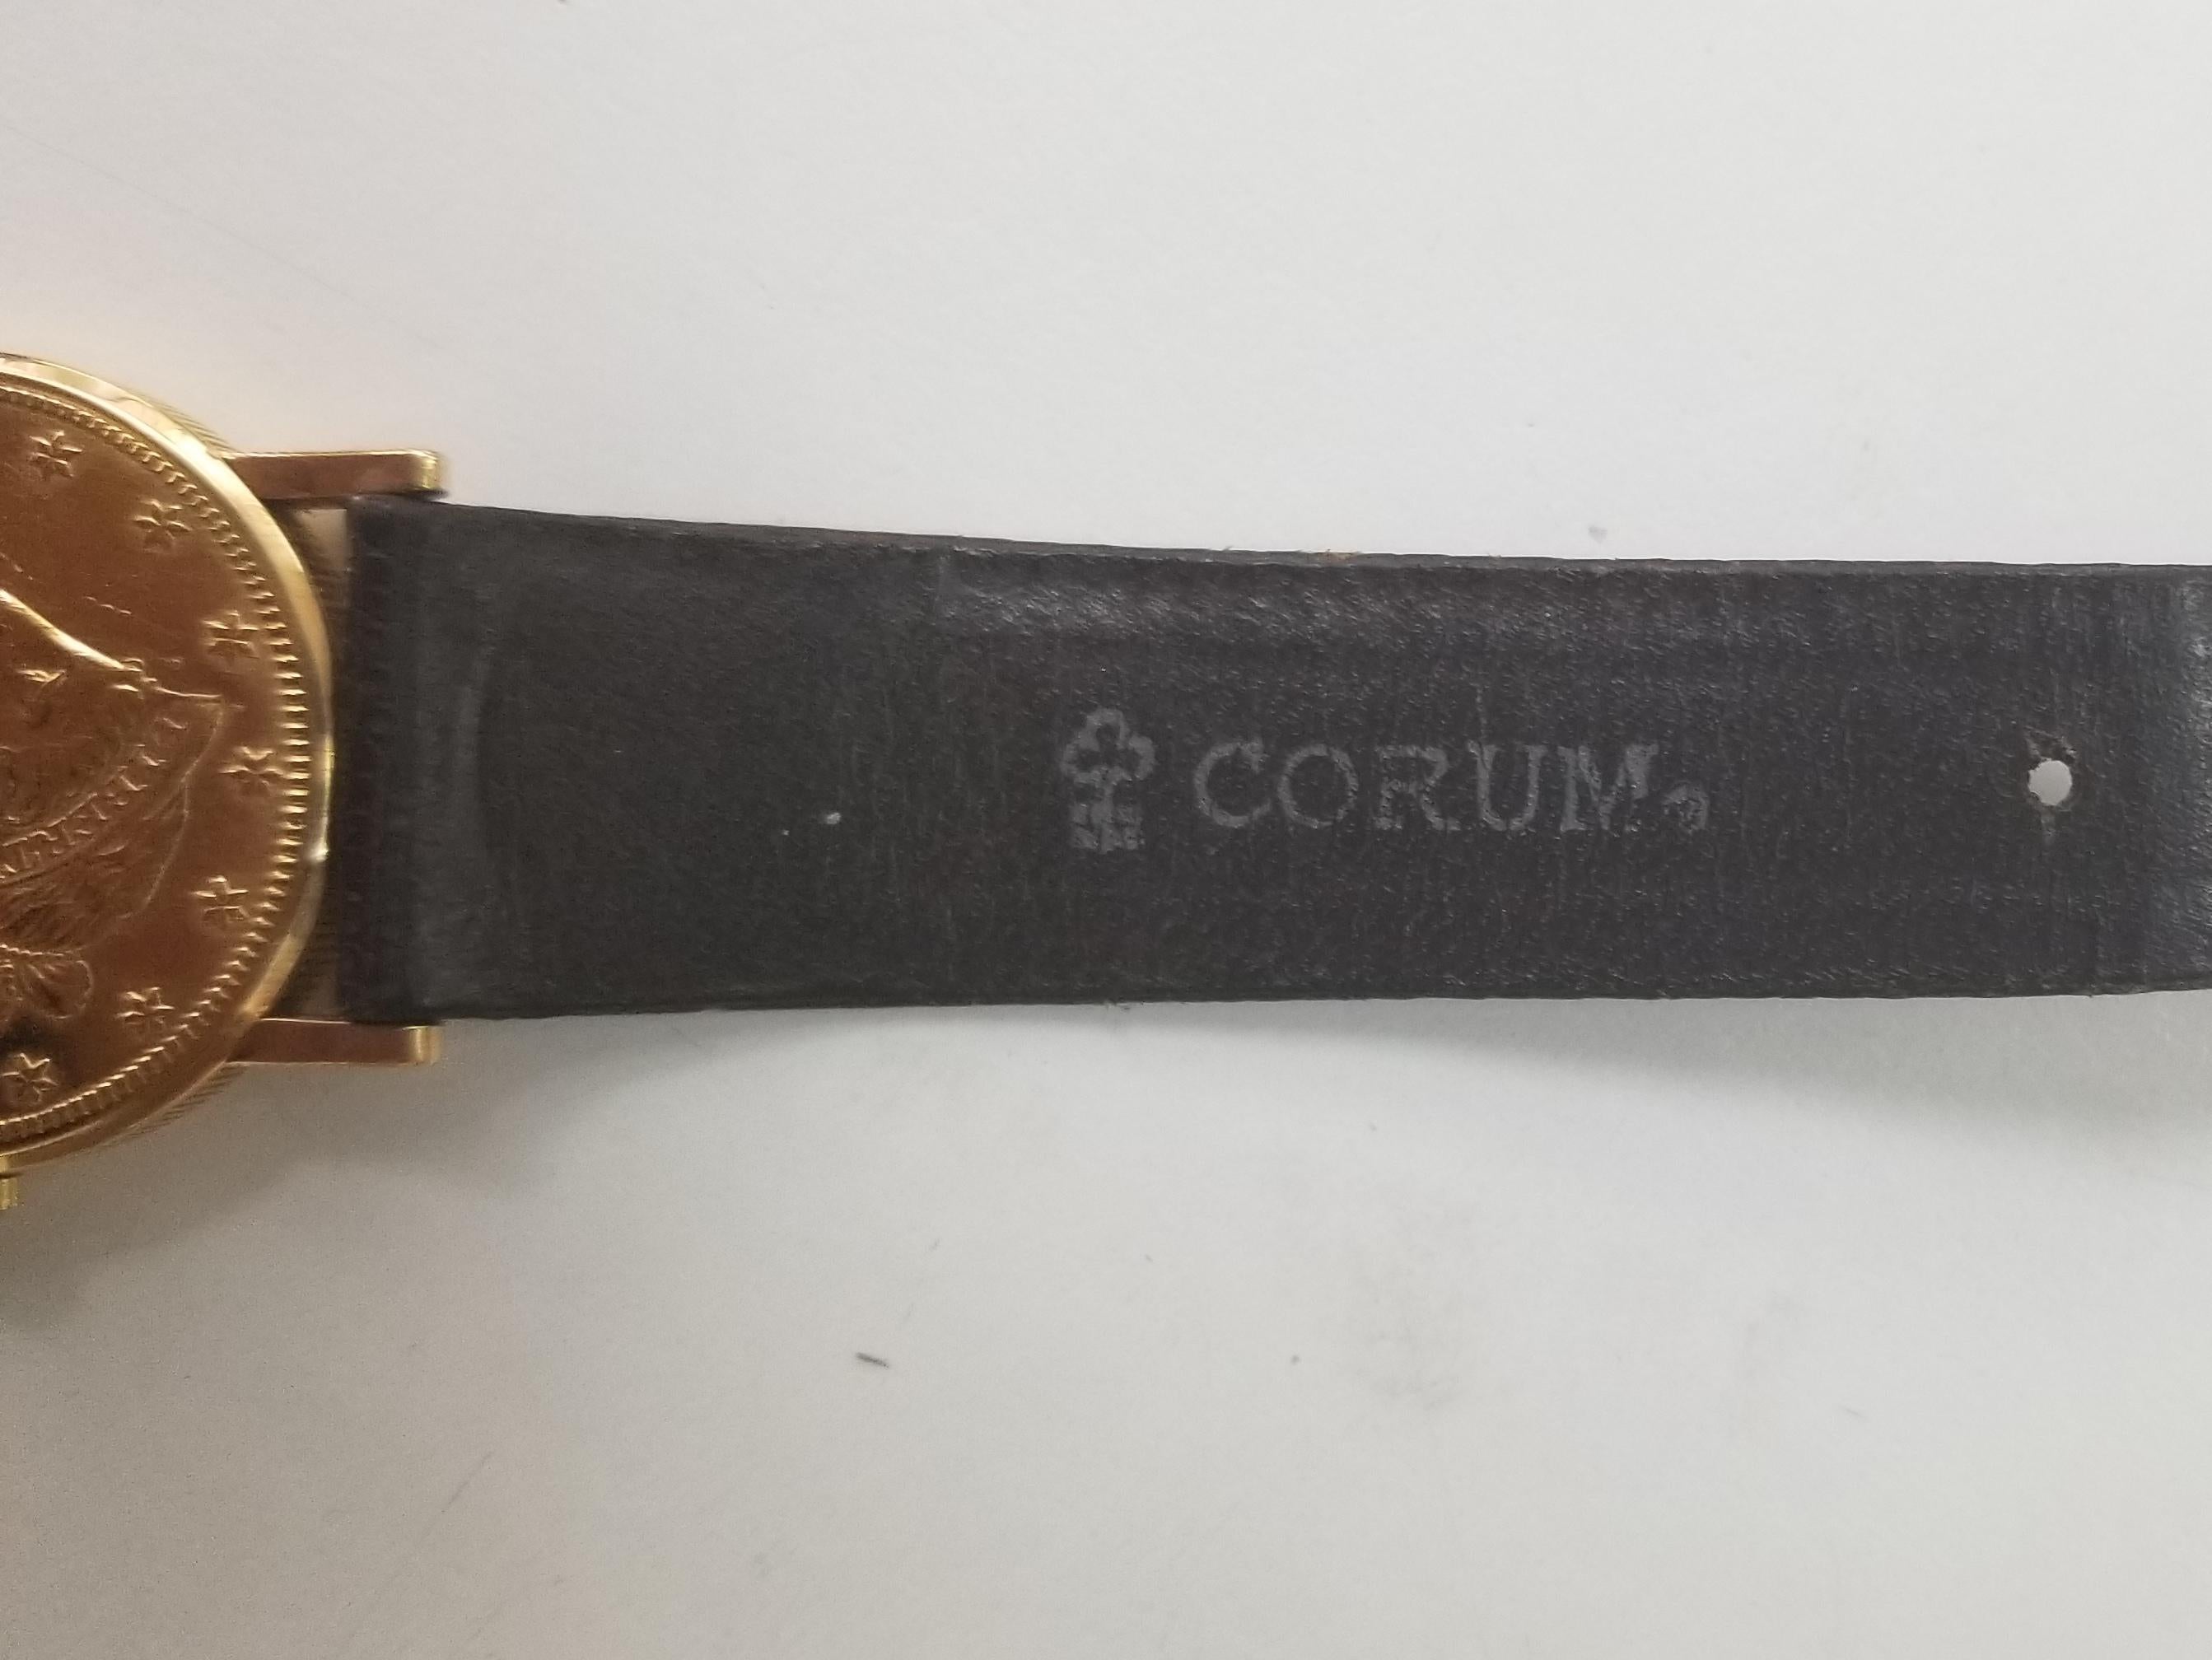 corum watches for sale